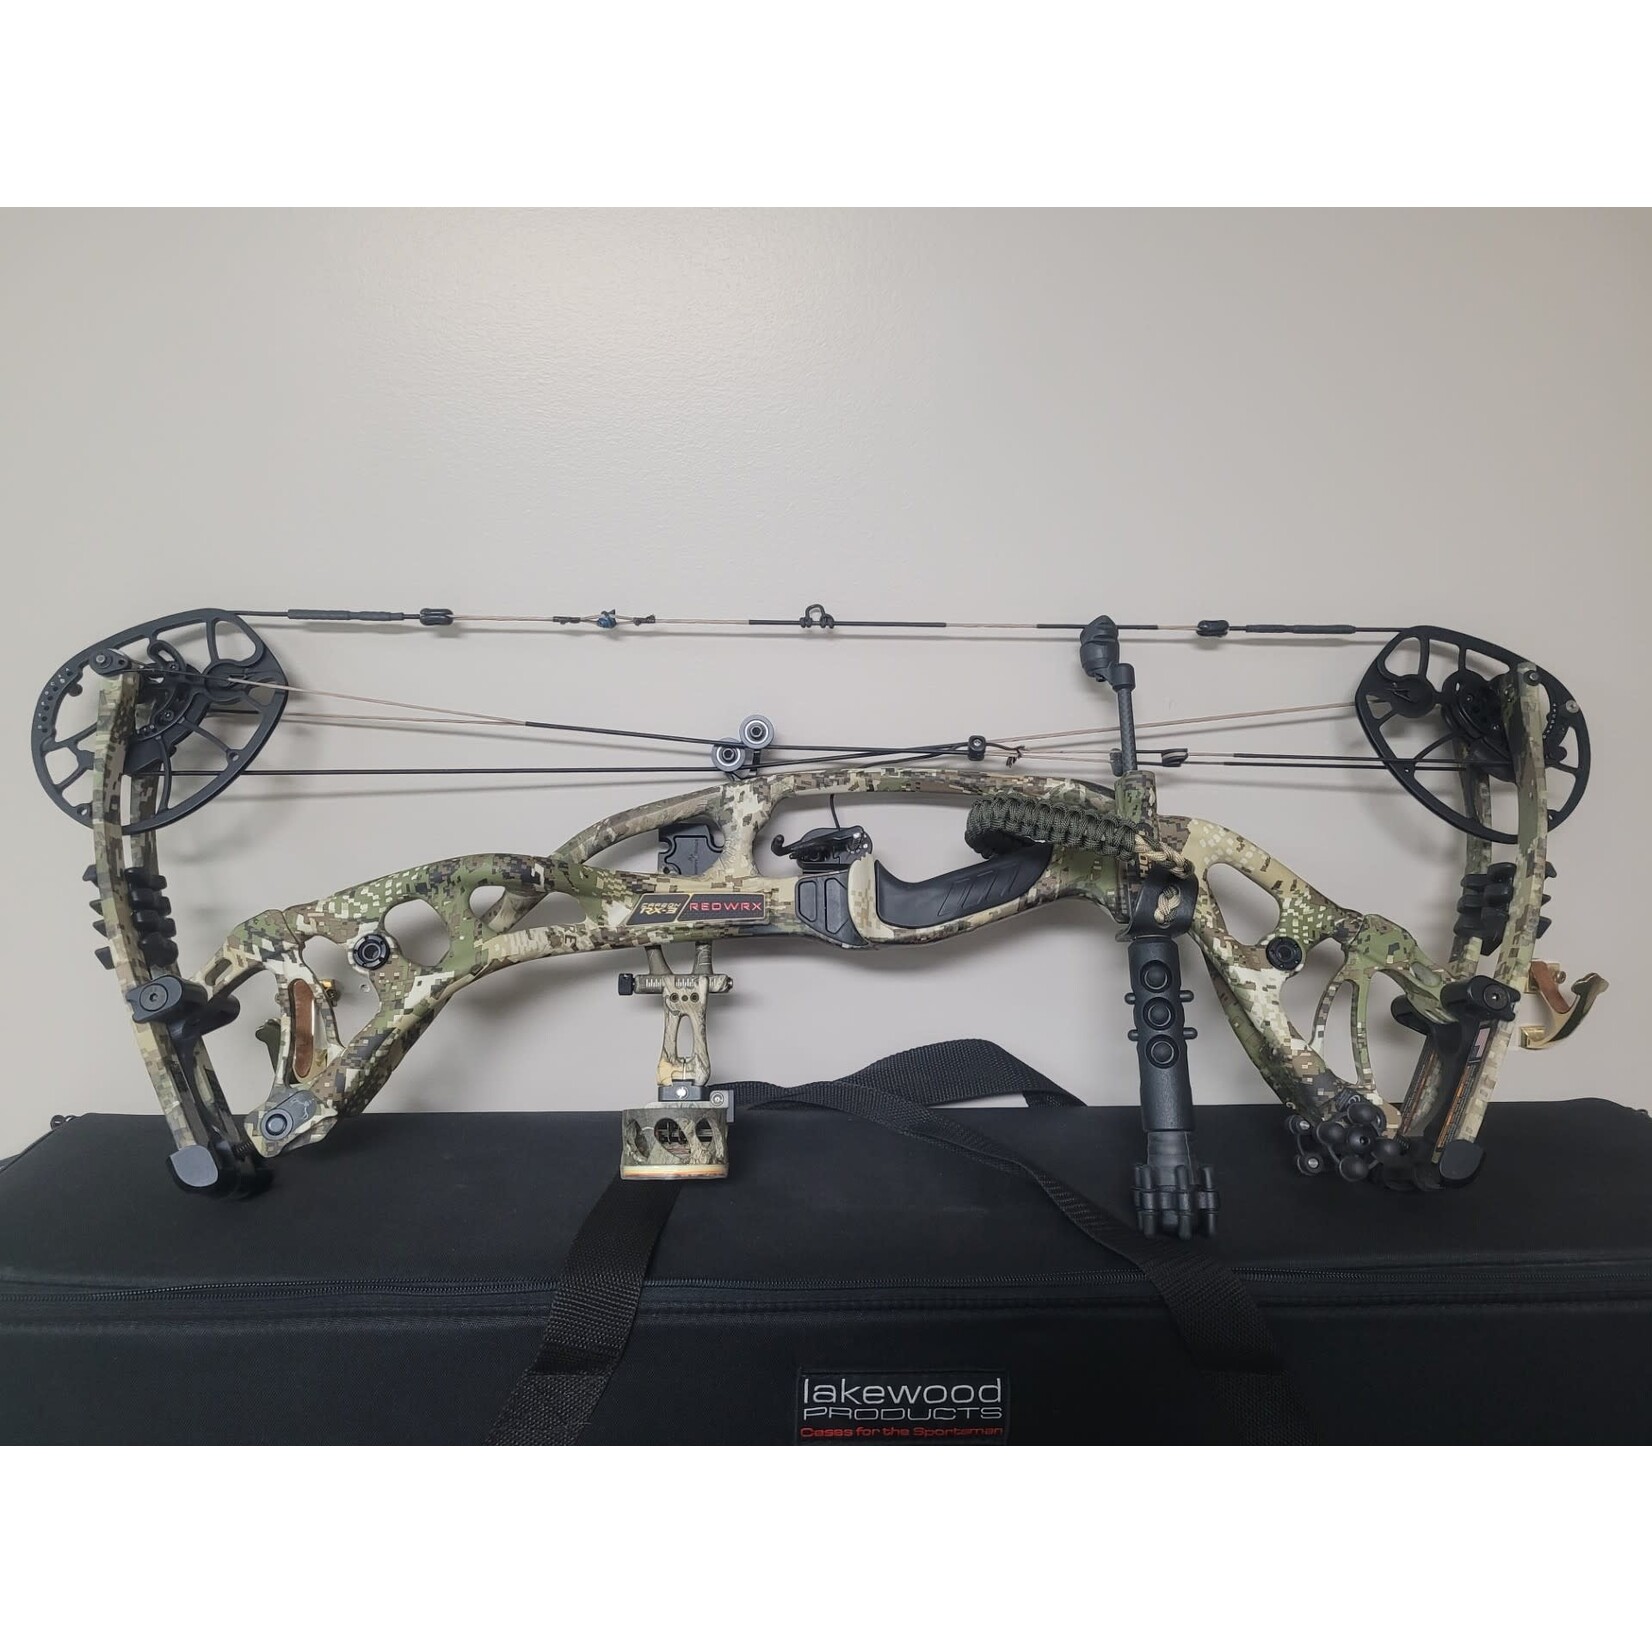 Hoyt Used Hoyt Carbon RX-3 Redwrx Compound Bow Package